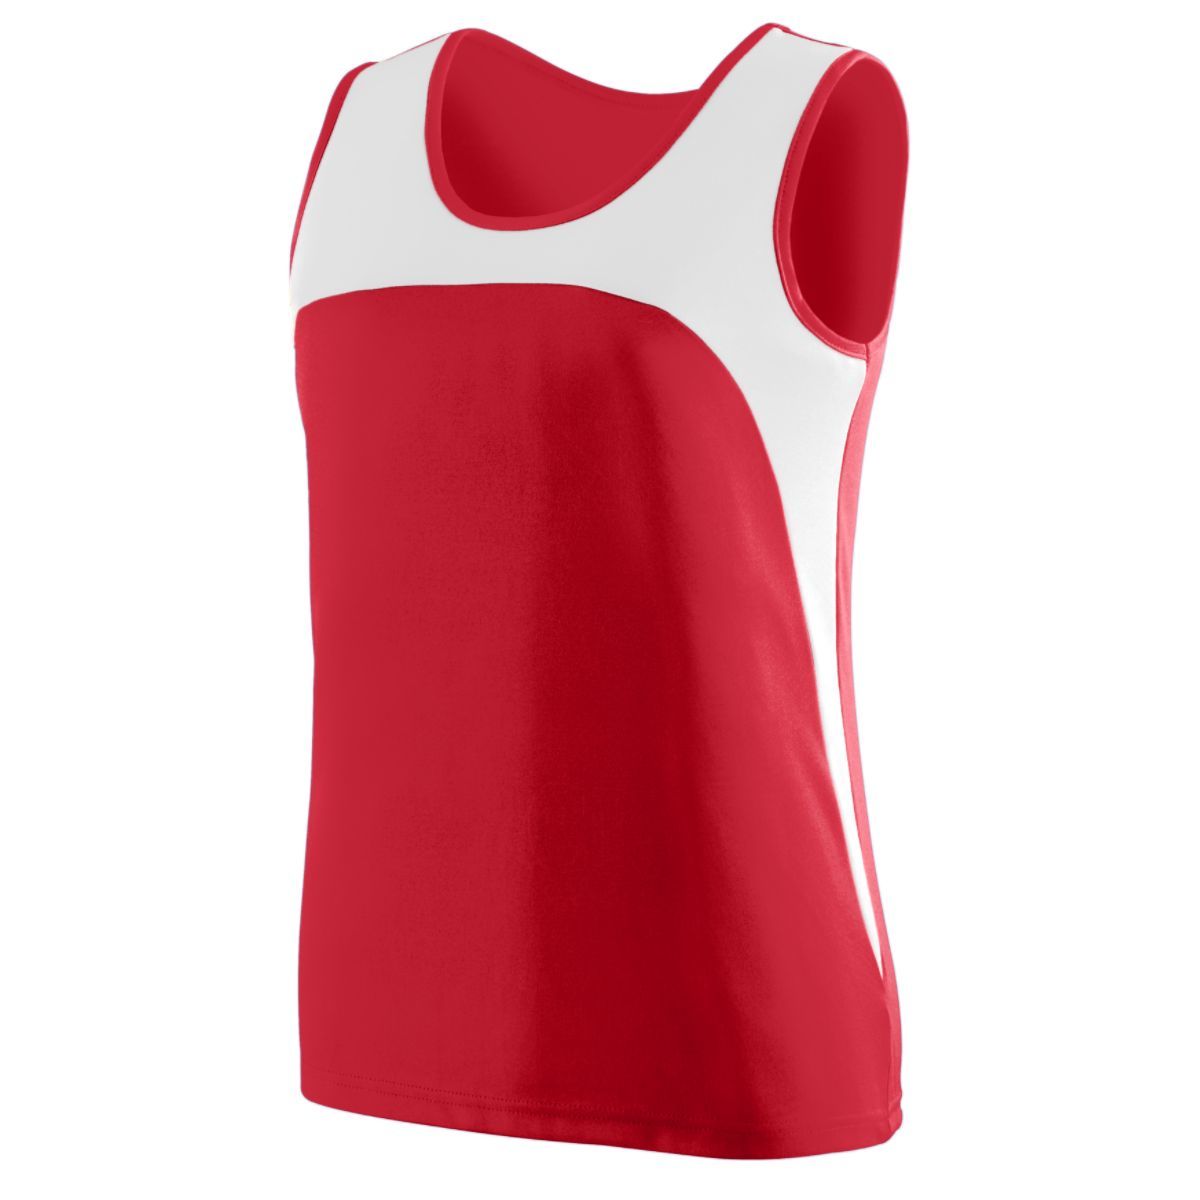 Augusta Sportswear Ladies Rapidpace Track Jersey in Red/White  -Part of the Ladies, Ladies-Jersey, Augusta-Products, Track-Field, Shirts product lines at KanaleyCreations.com